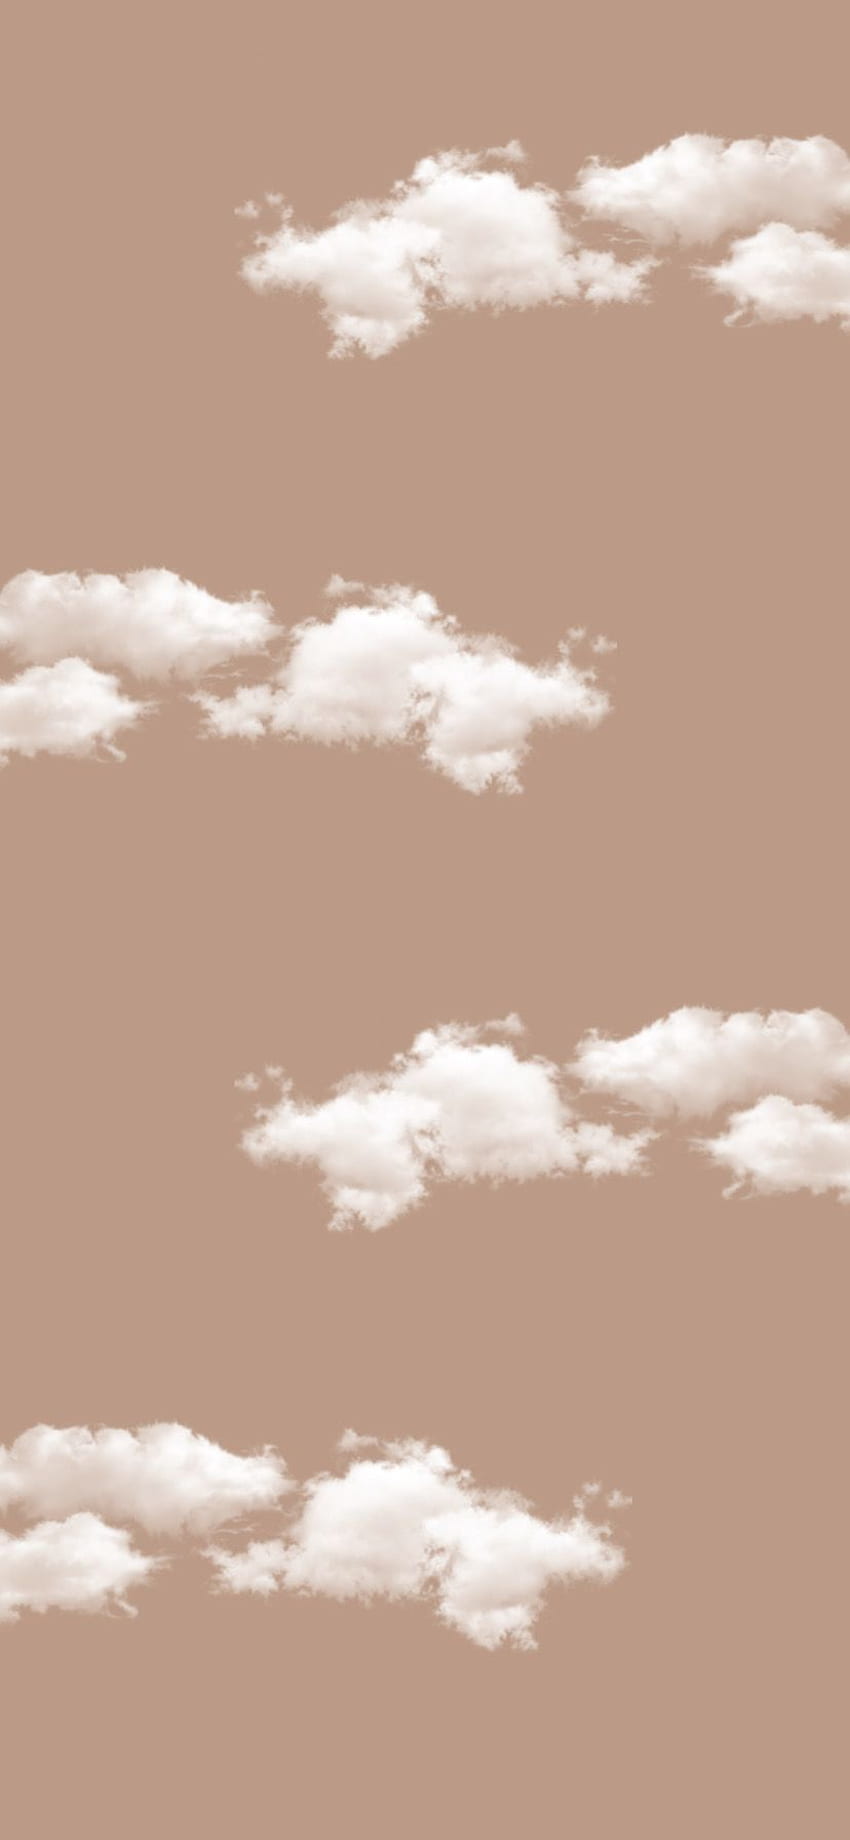 A tan background with clouds - Brown